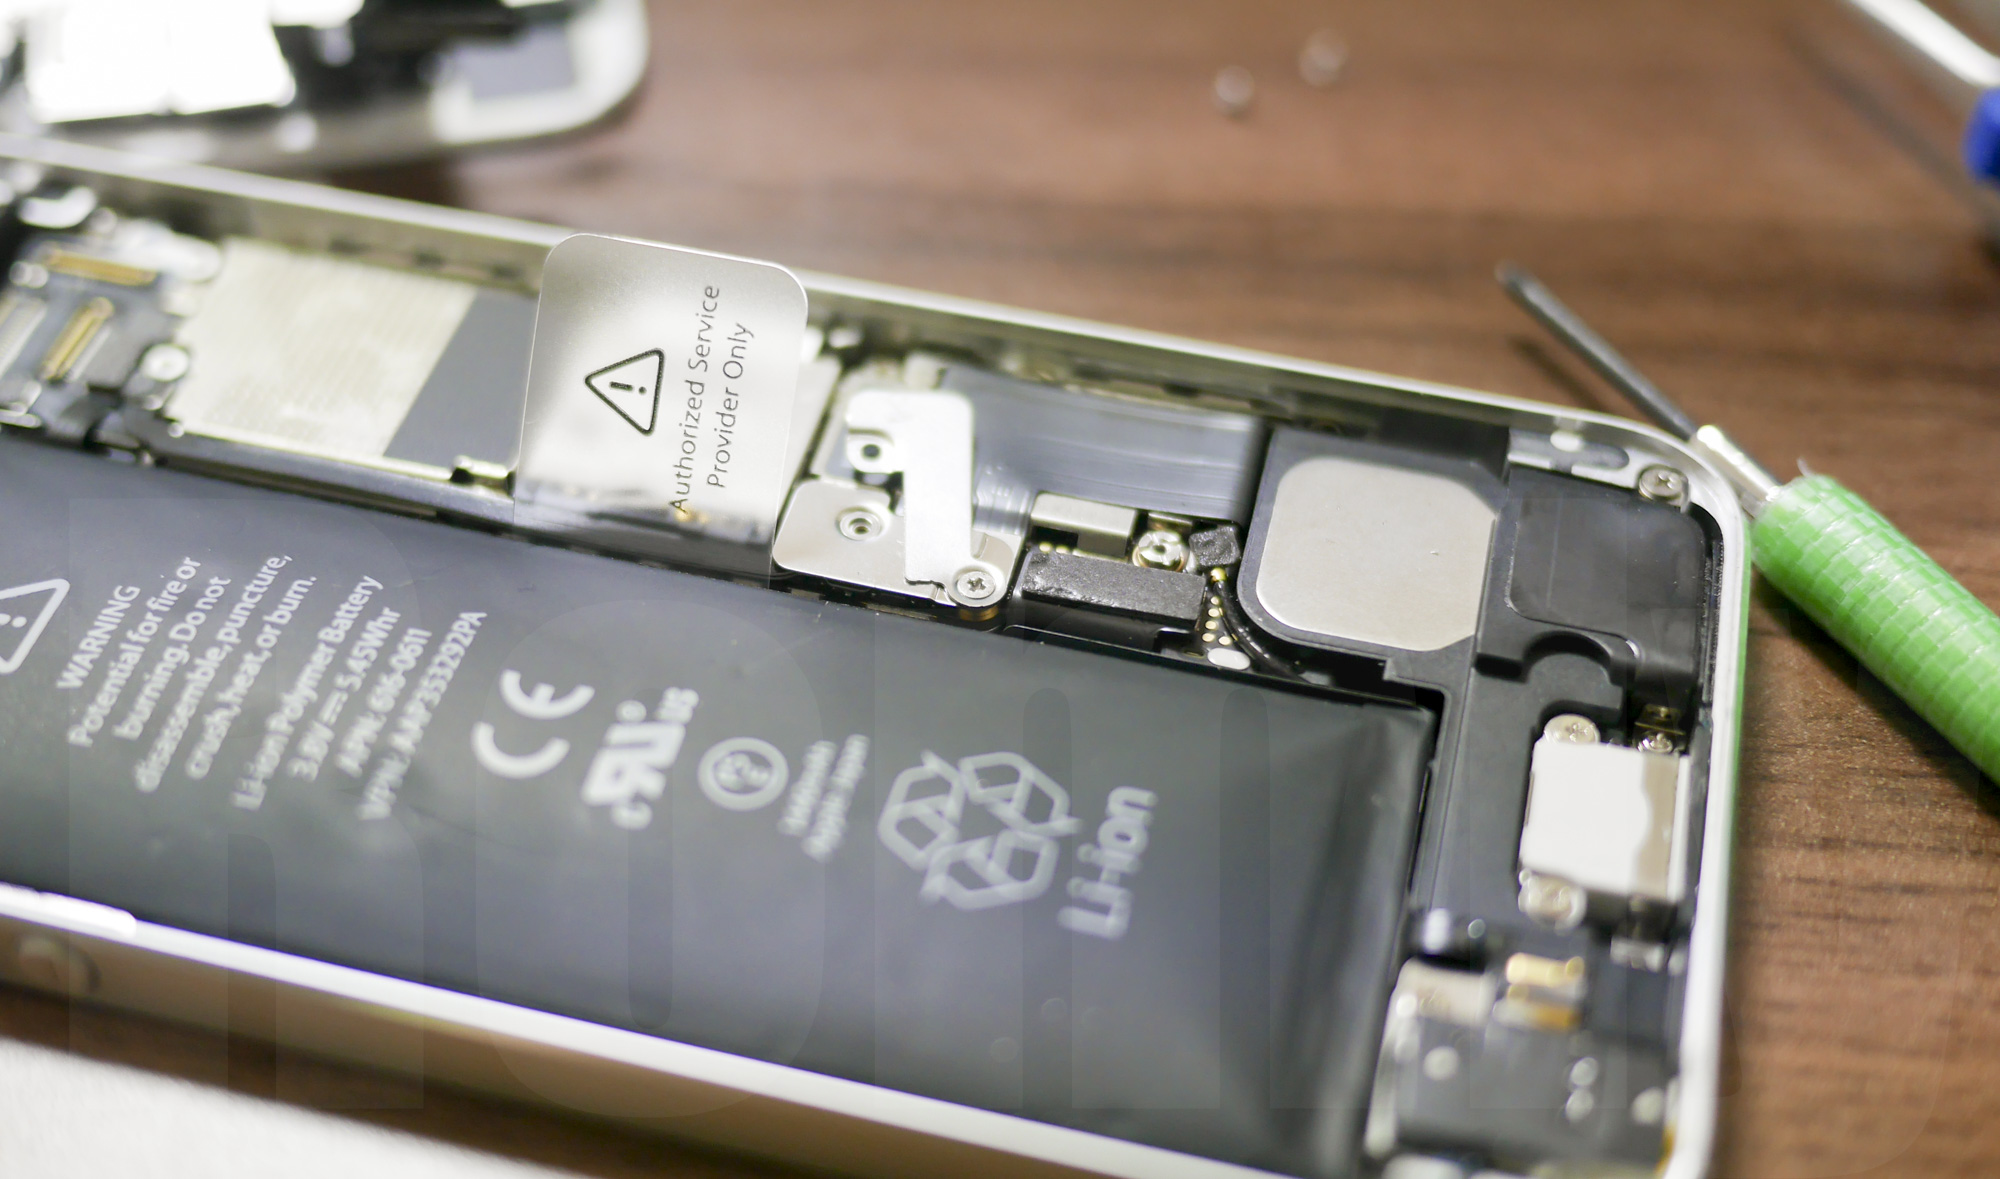 iPhone 5 Battery replacement: couldn't remove screw so...